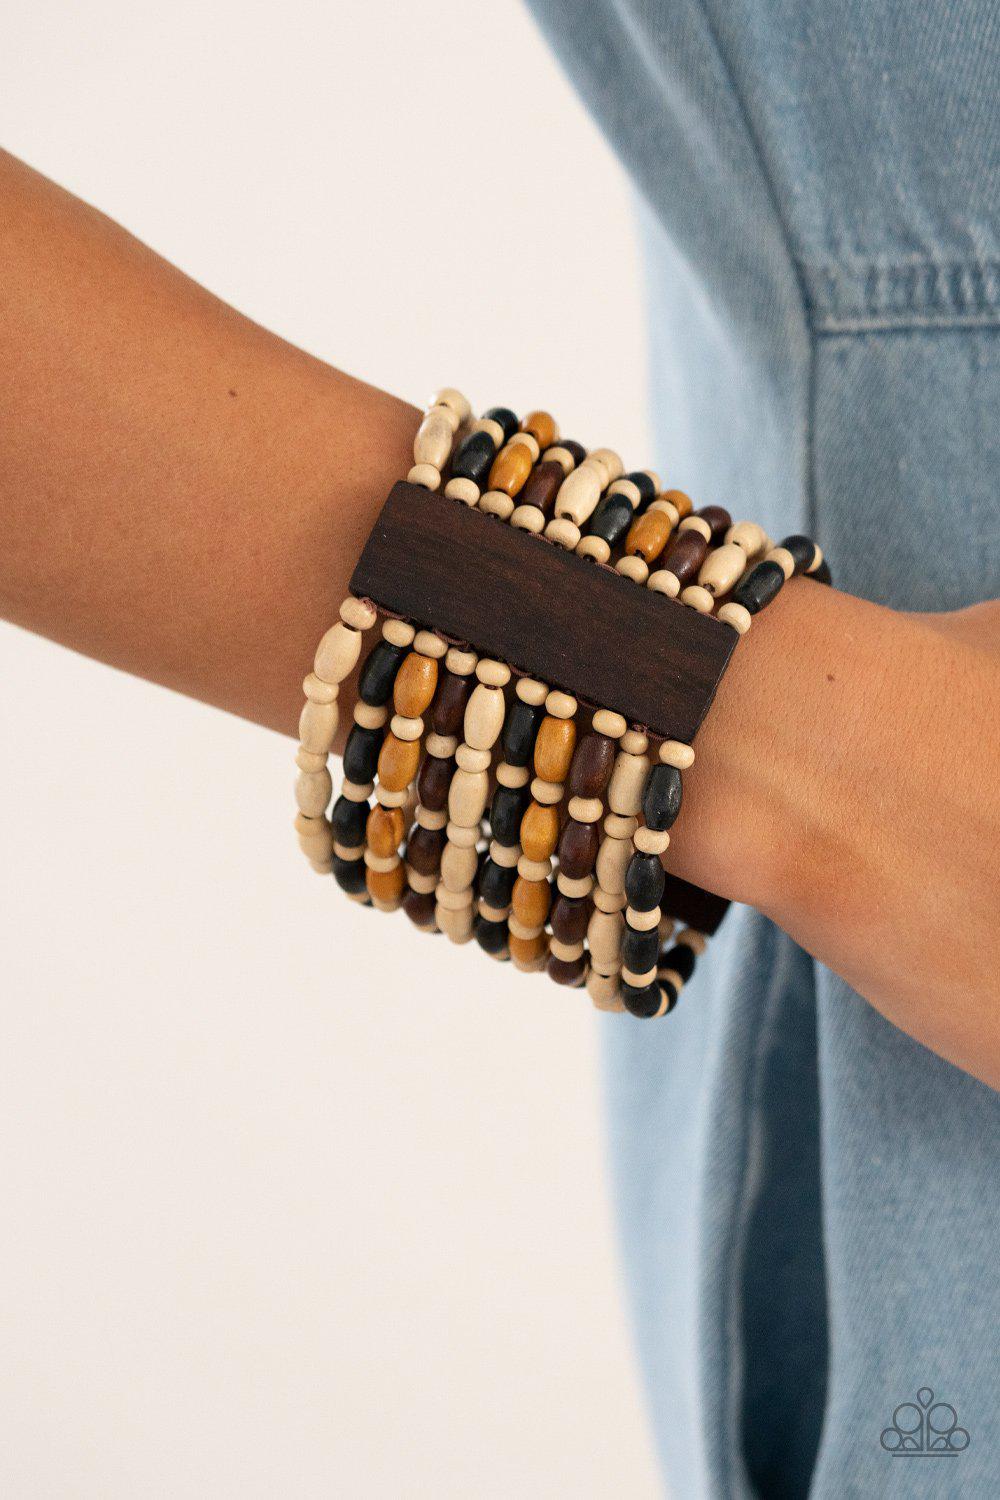 Cayman Carnival Multi Black, Brown and White Wood Bracelet - Paparazzi Accessories- model - CarasShop.com - $5 Jewelry by Cara Jewels